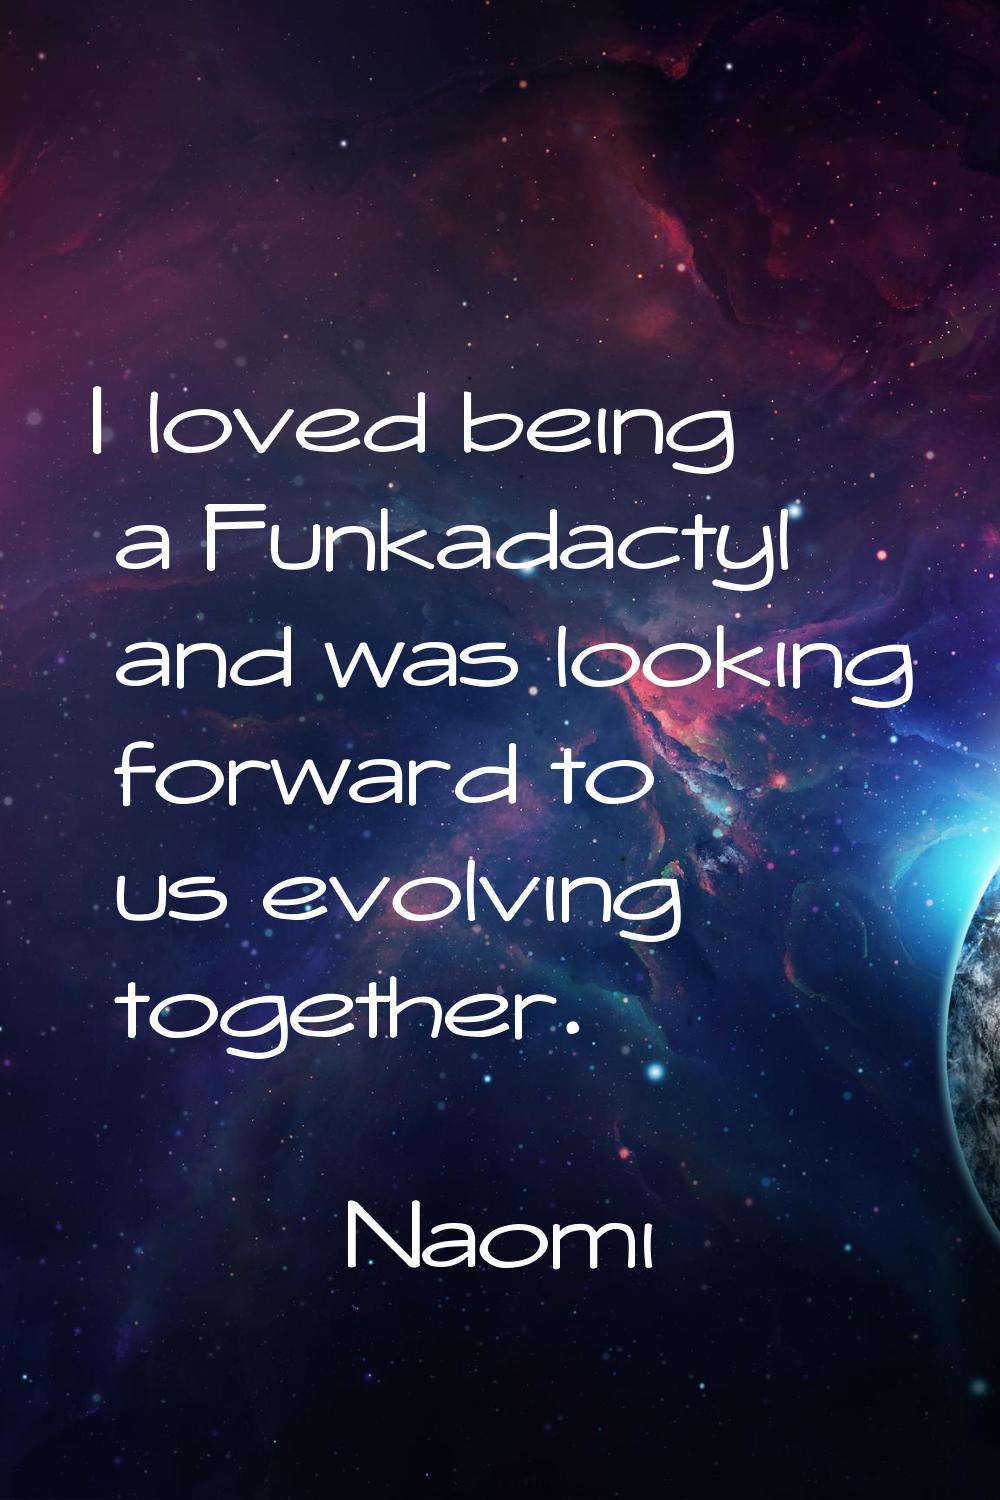 I loved being a Funkadactyl and was looking forward to us evolving together.